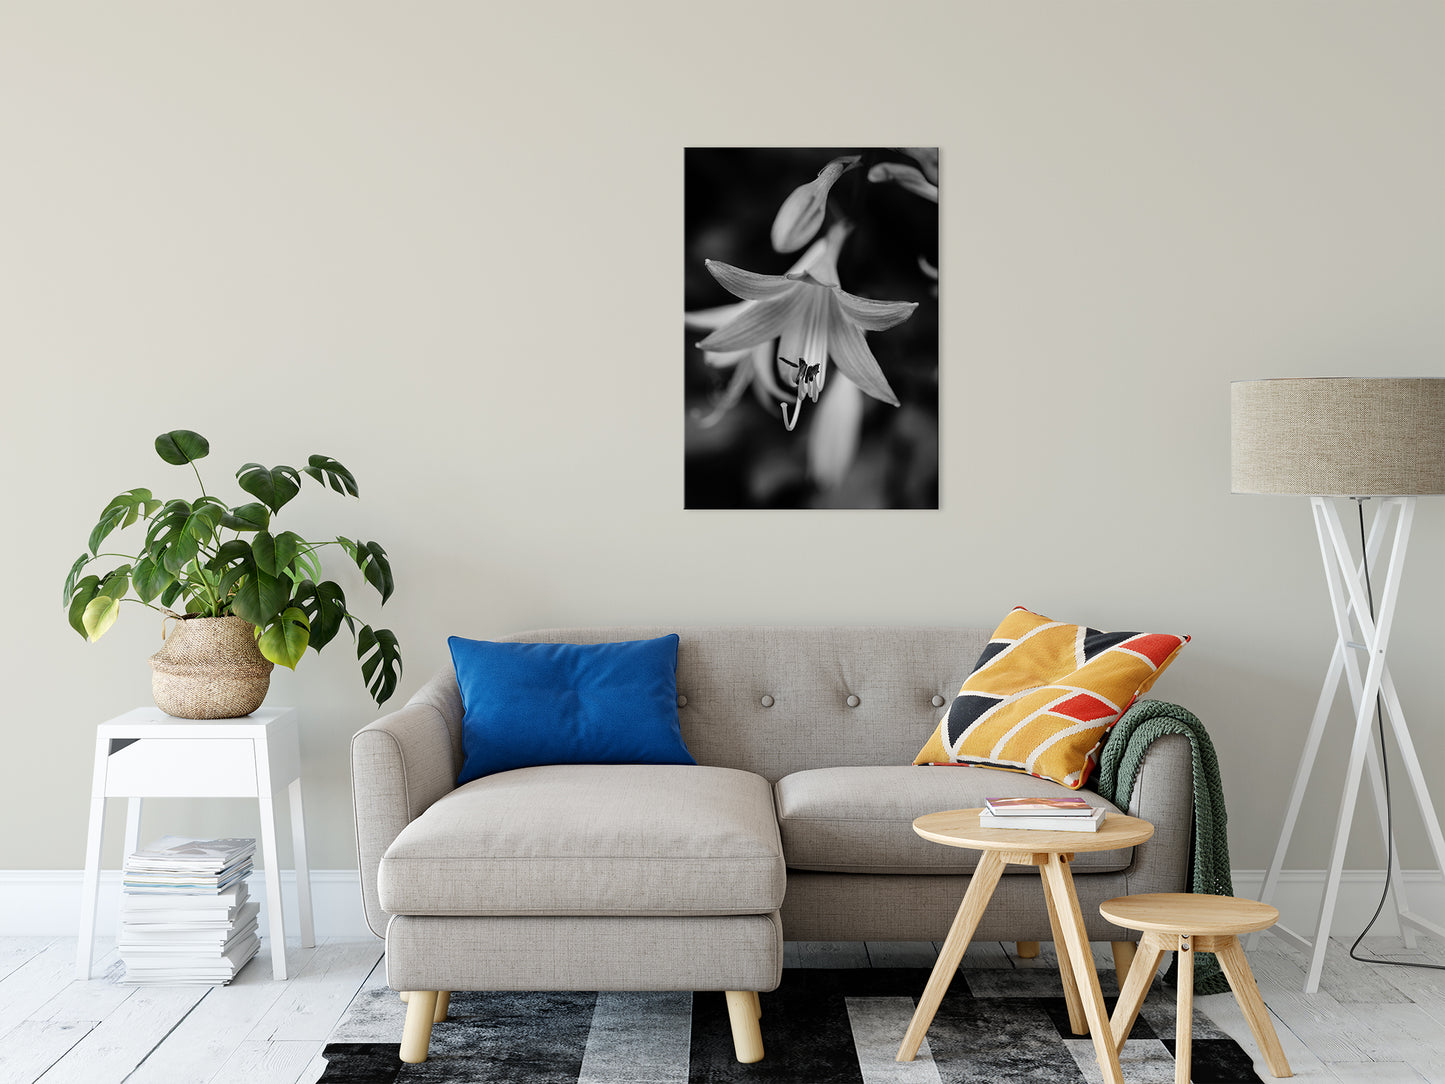 Hosta Bloom in Black & White Nature / Floral Photo Fine Art Canvas Wall Art Prints 24" x 36" - PIPAFINEART